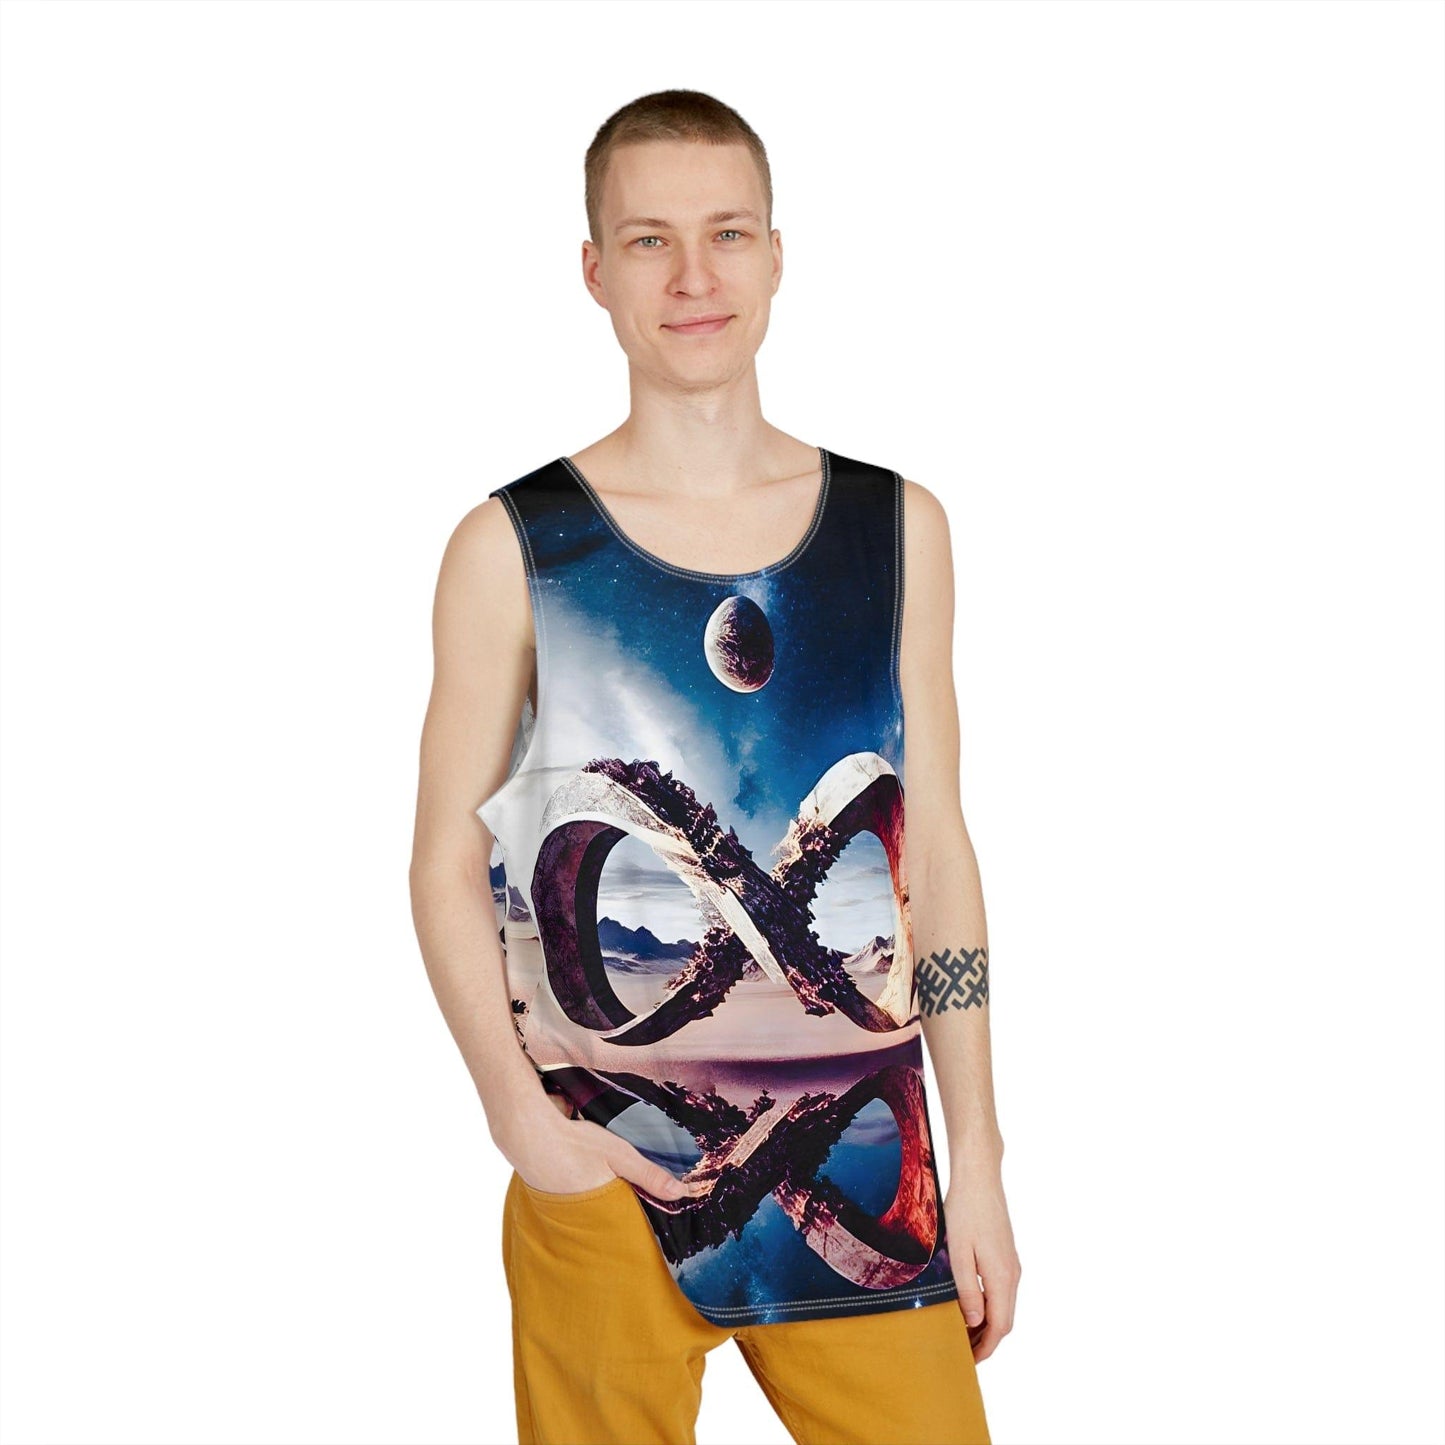 Infinite Possibilities Sublimation Tank Top Sublimation Print All-Over (AOP) Design Tank Top - Stylish Comfort for Festival, Gym, and Streetwear - Alchemystics.org